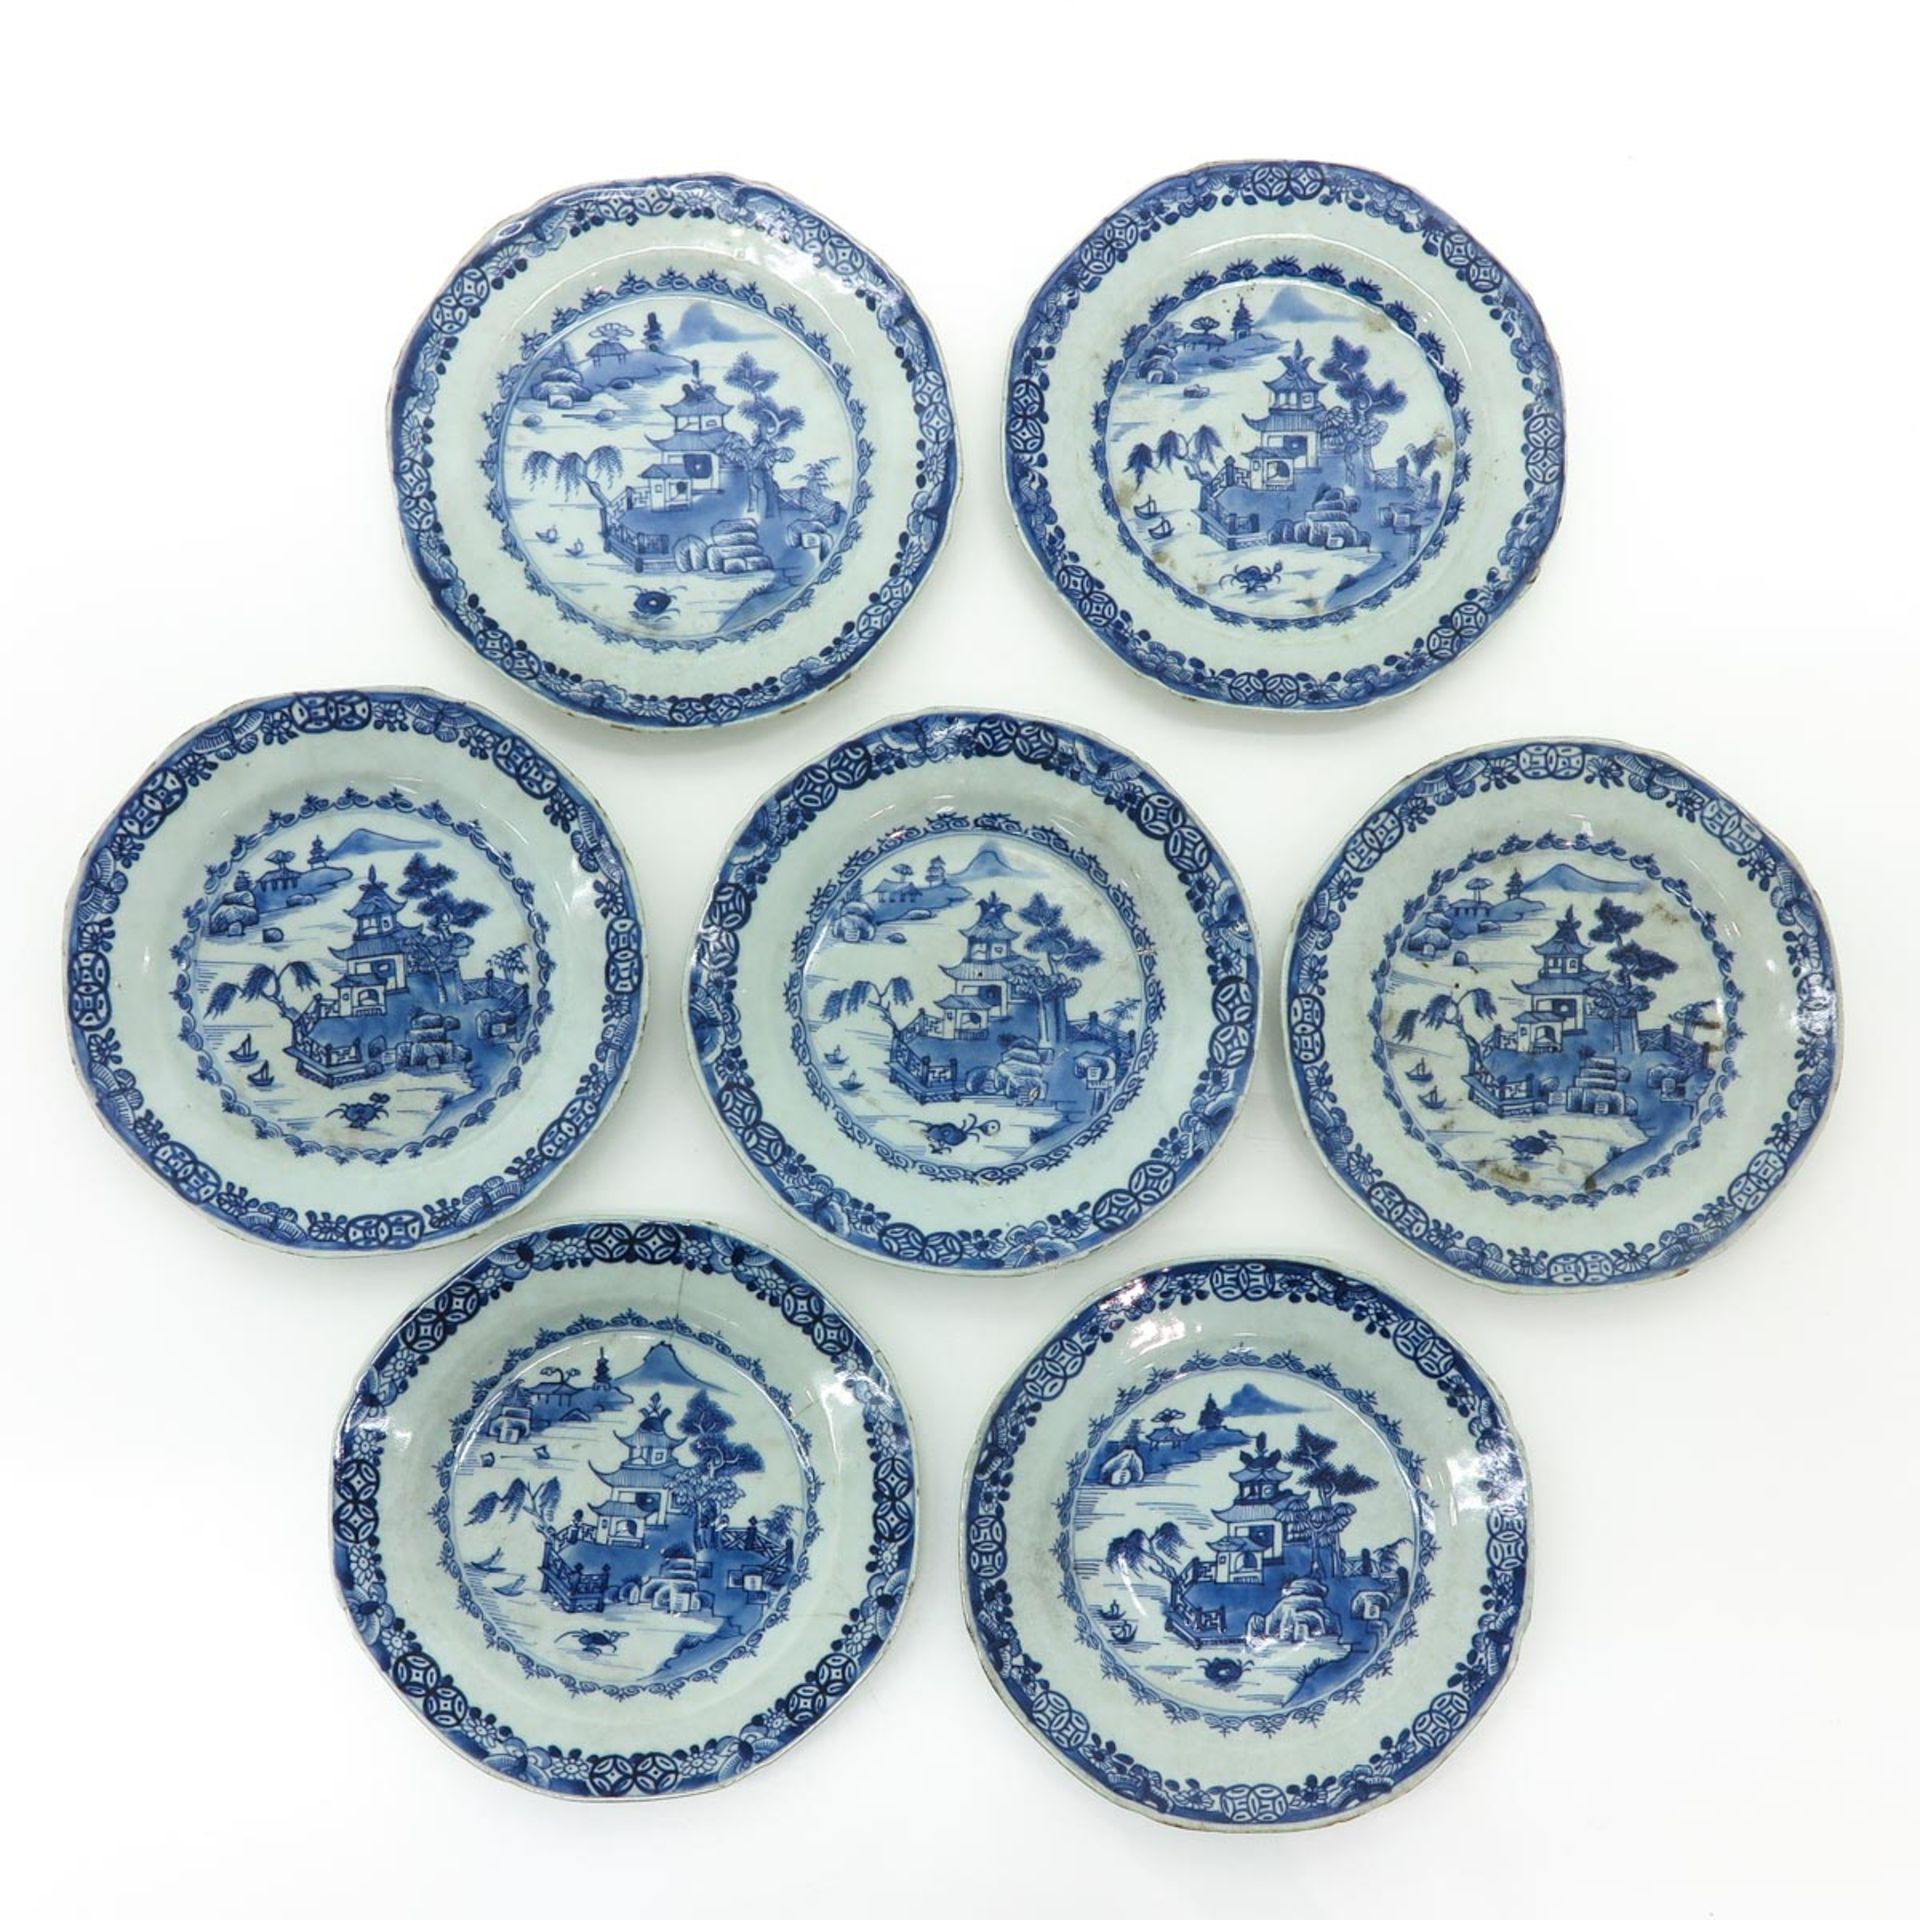 A Series of Seven Chinese Blue and White Plates